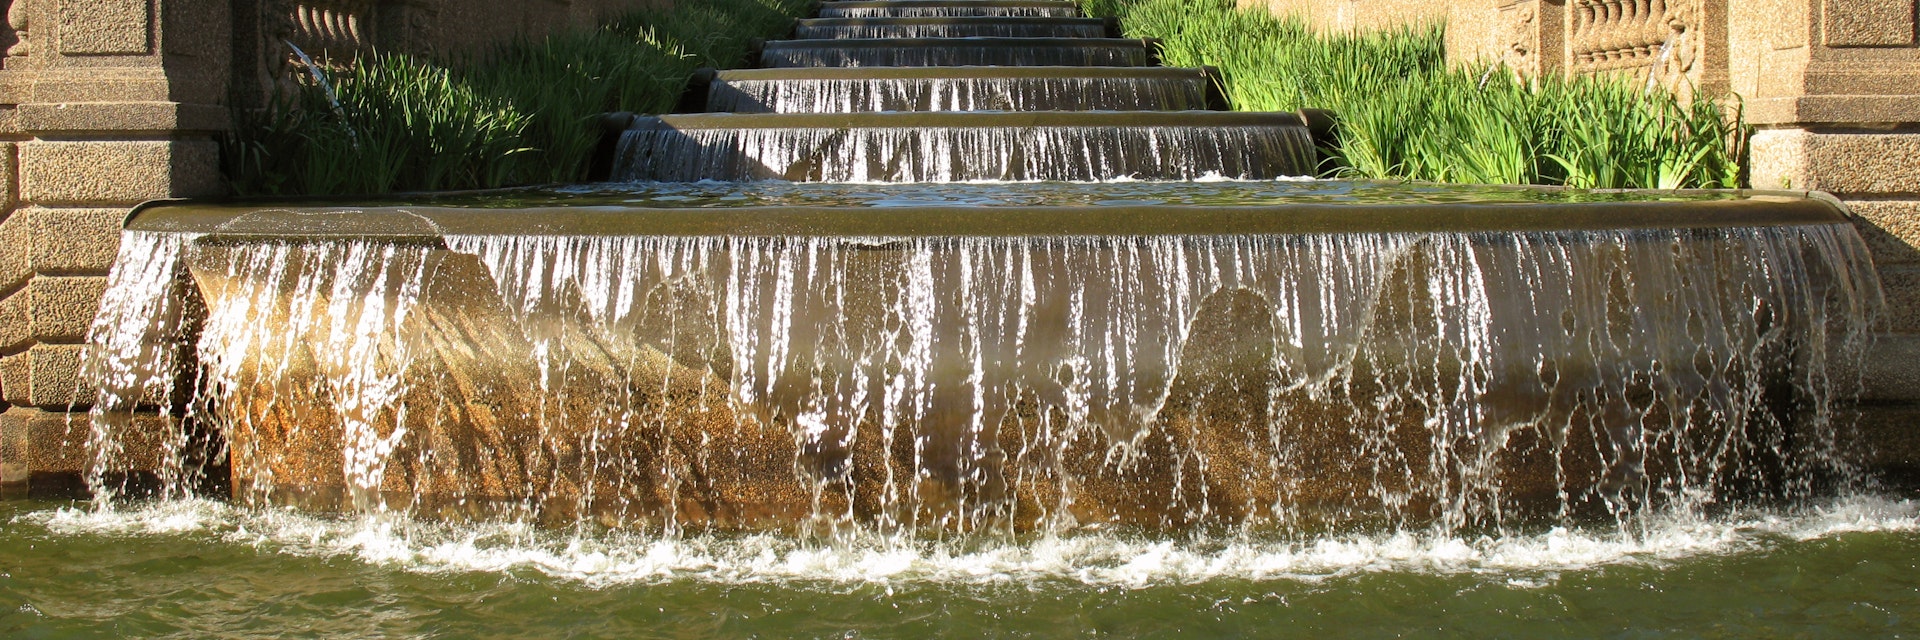 Photo of series of waterfalls in Meridian Hill Park in northwest Washington D.C.  This park is an example of neoclassicist park design and has some of the most beautiful architecture in the city.
144354192
Architecture, Famous Place, Fountain, Park, Steps, Stone, Washington DC, Waterfall, neoclassicist